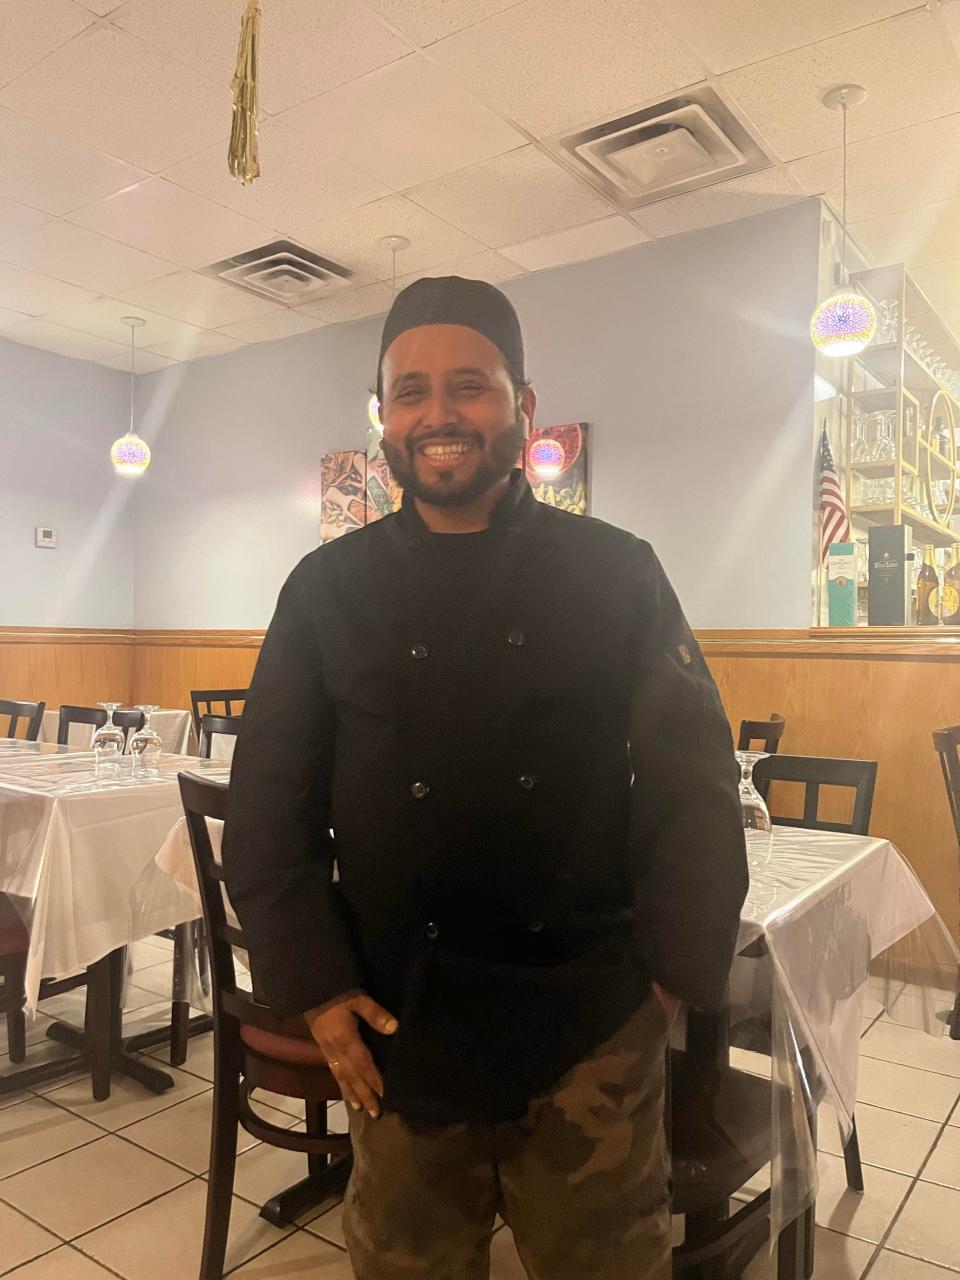 Heman Adhikari is owner and chef at The Spice Delight North Indian restaurant in Munroe Falls.